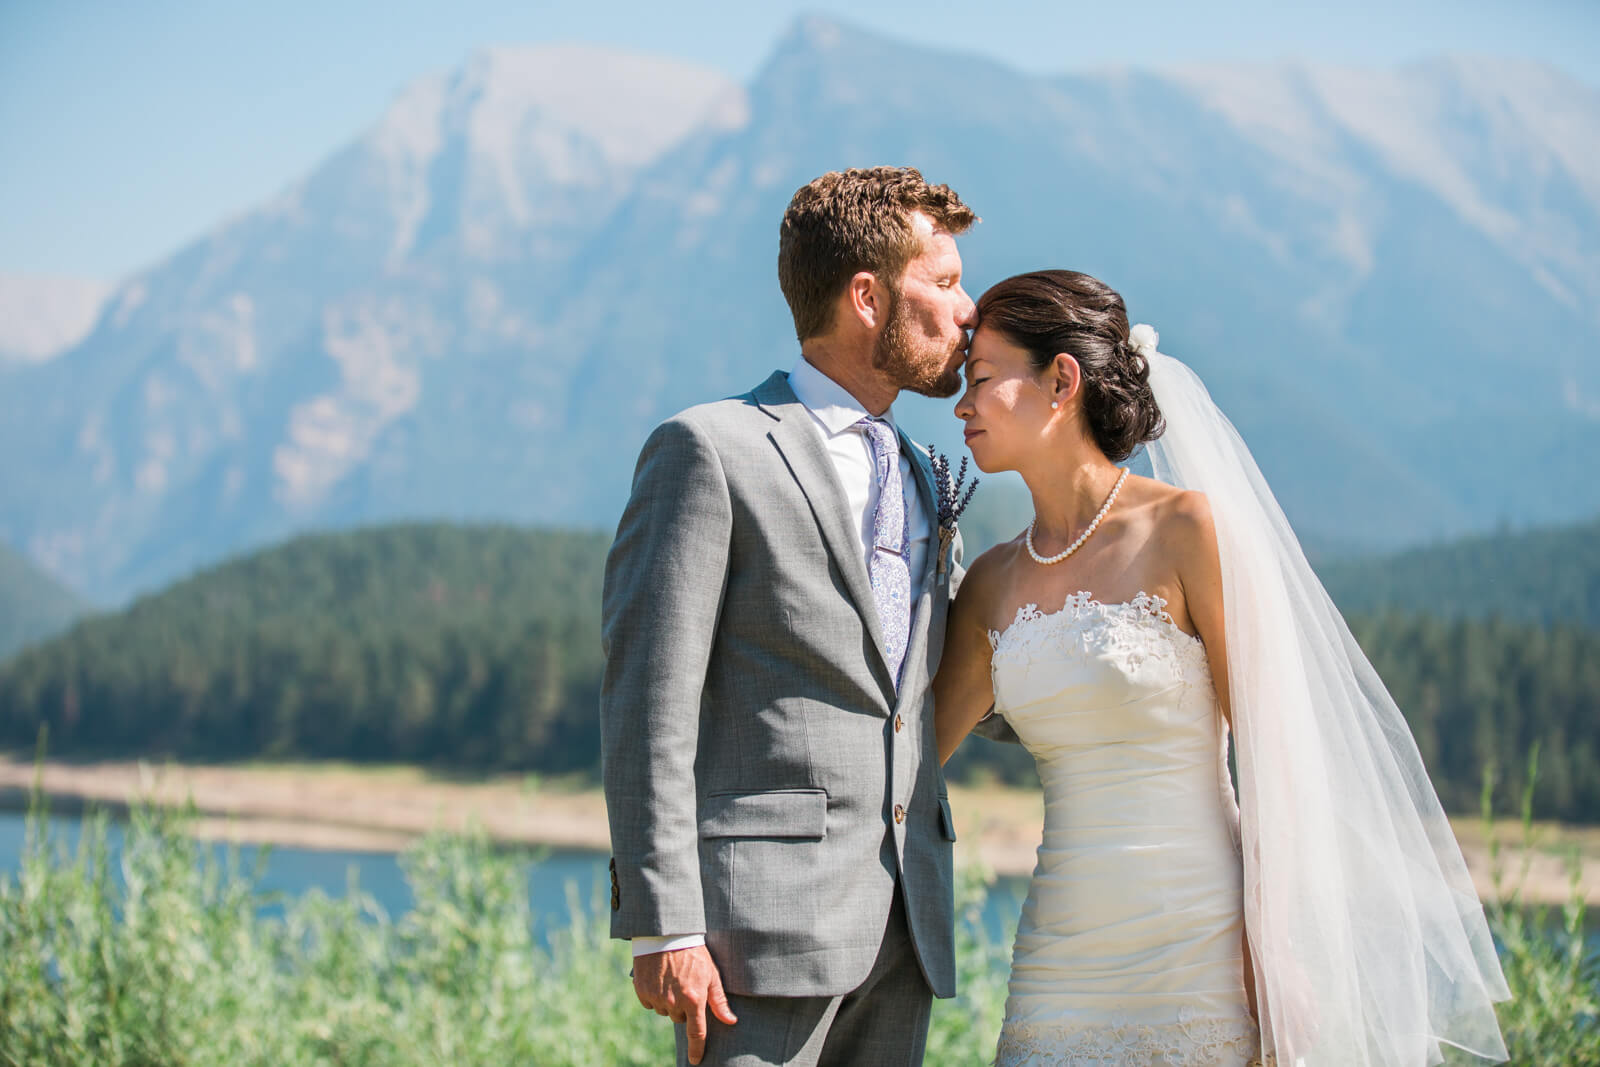 A groom kisses his bride's forehead at their intimate wedding in St Ignatius Montana